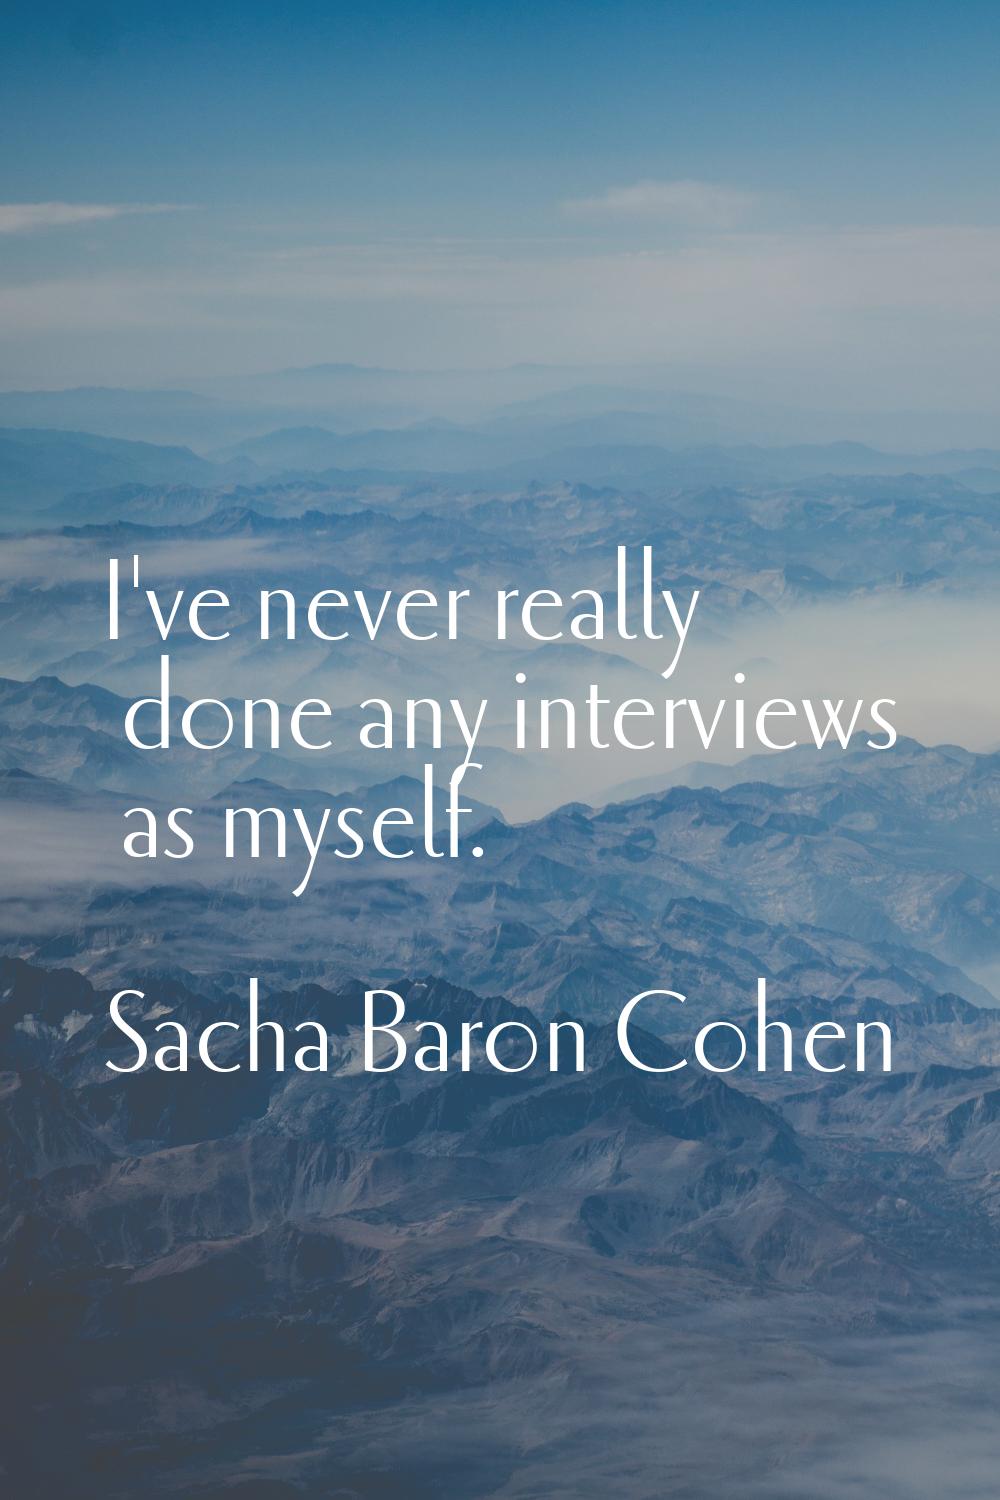 I've never really done any interviews as myself.